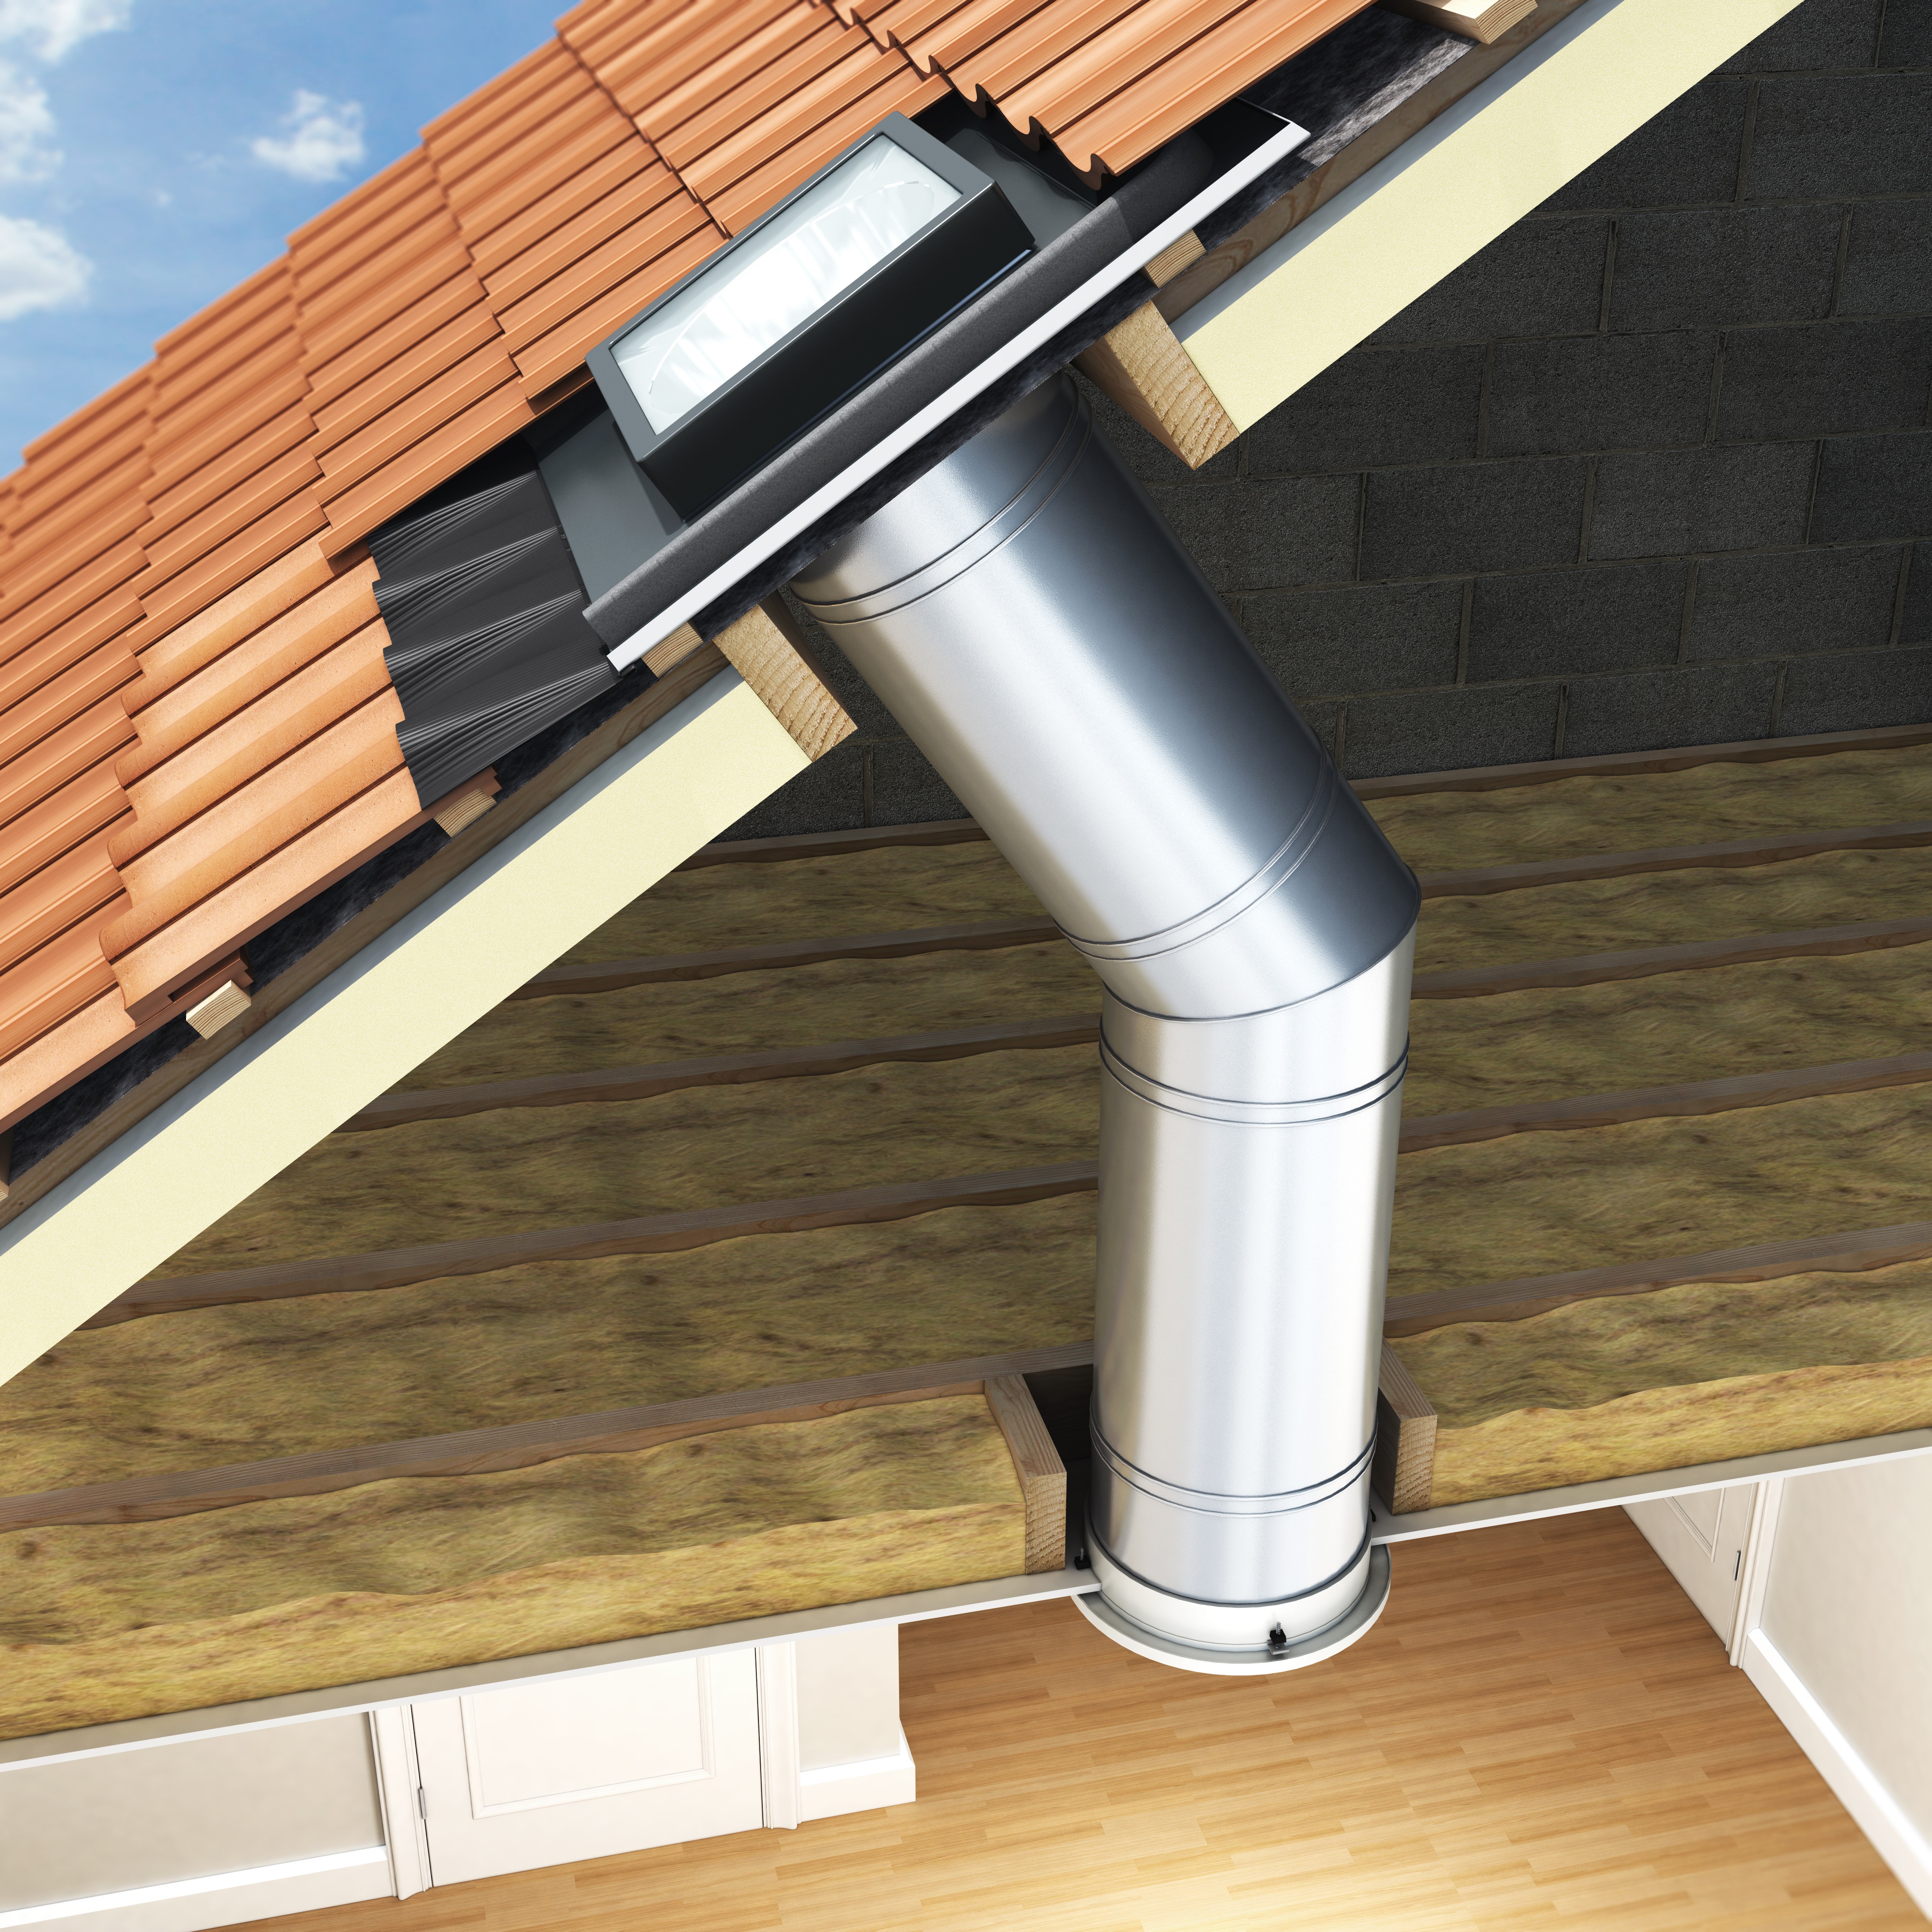 KEYLITE - Pitched Roof Sunlite System